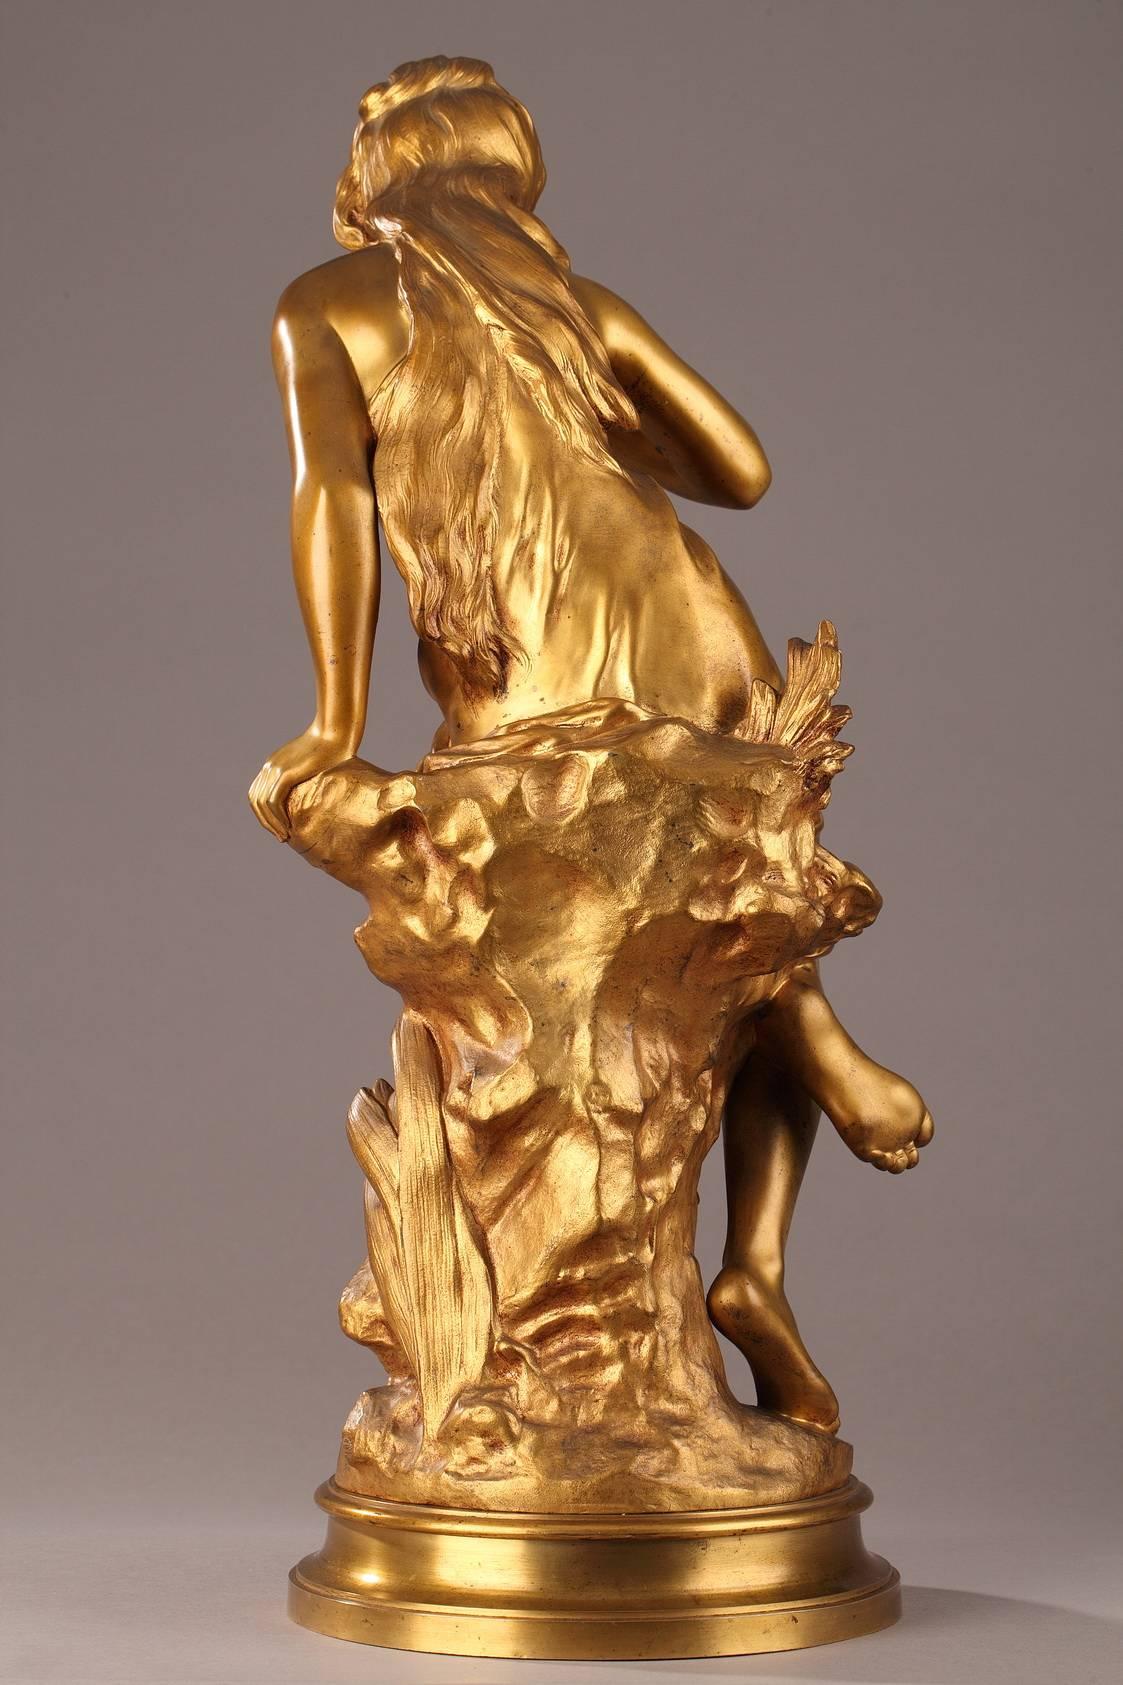 Gilt bronze sculpture titled “La Source” (The Spring), portraying a young woman drinking water from a spring using a shell as her cup. The sculpture is set on a terraced, circular base. Signed: 